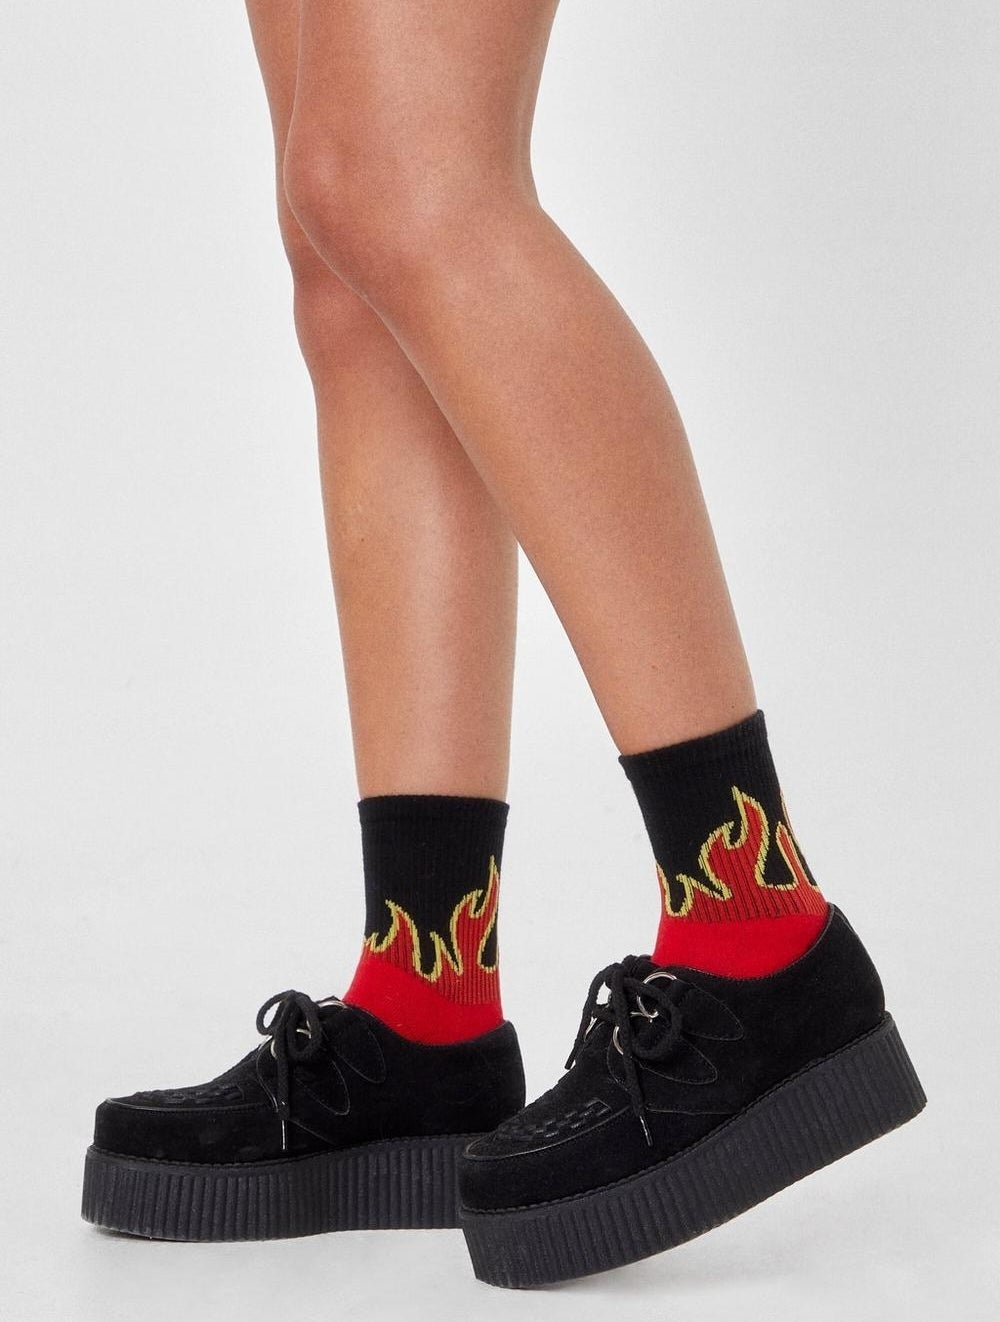 a person wearing socks with flames on them 